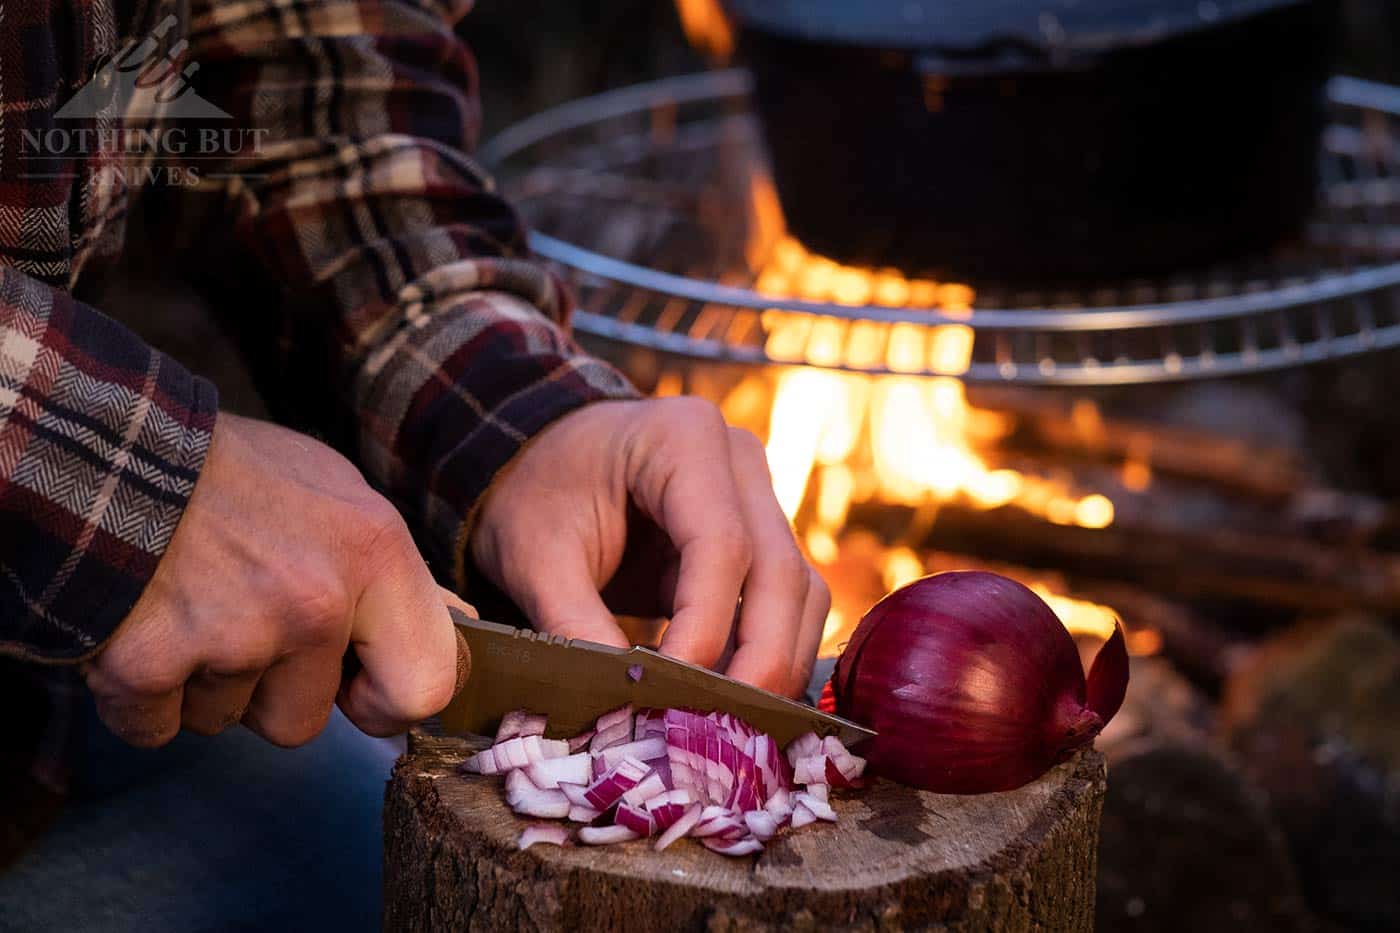 A man's hand chopping an onion for a stew next to a camp fire.